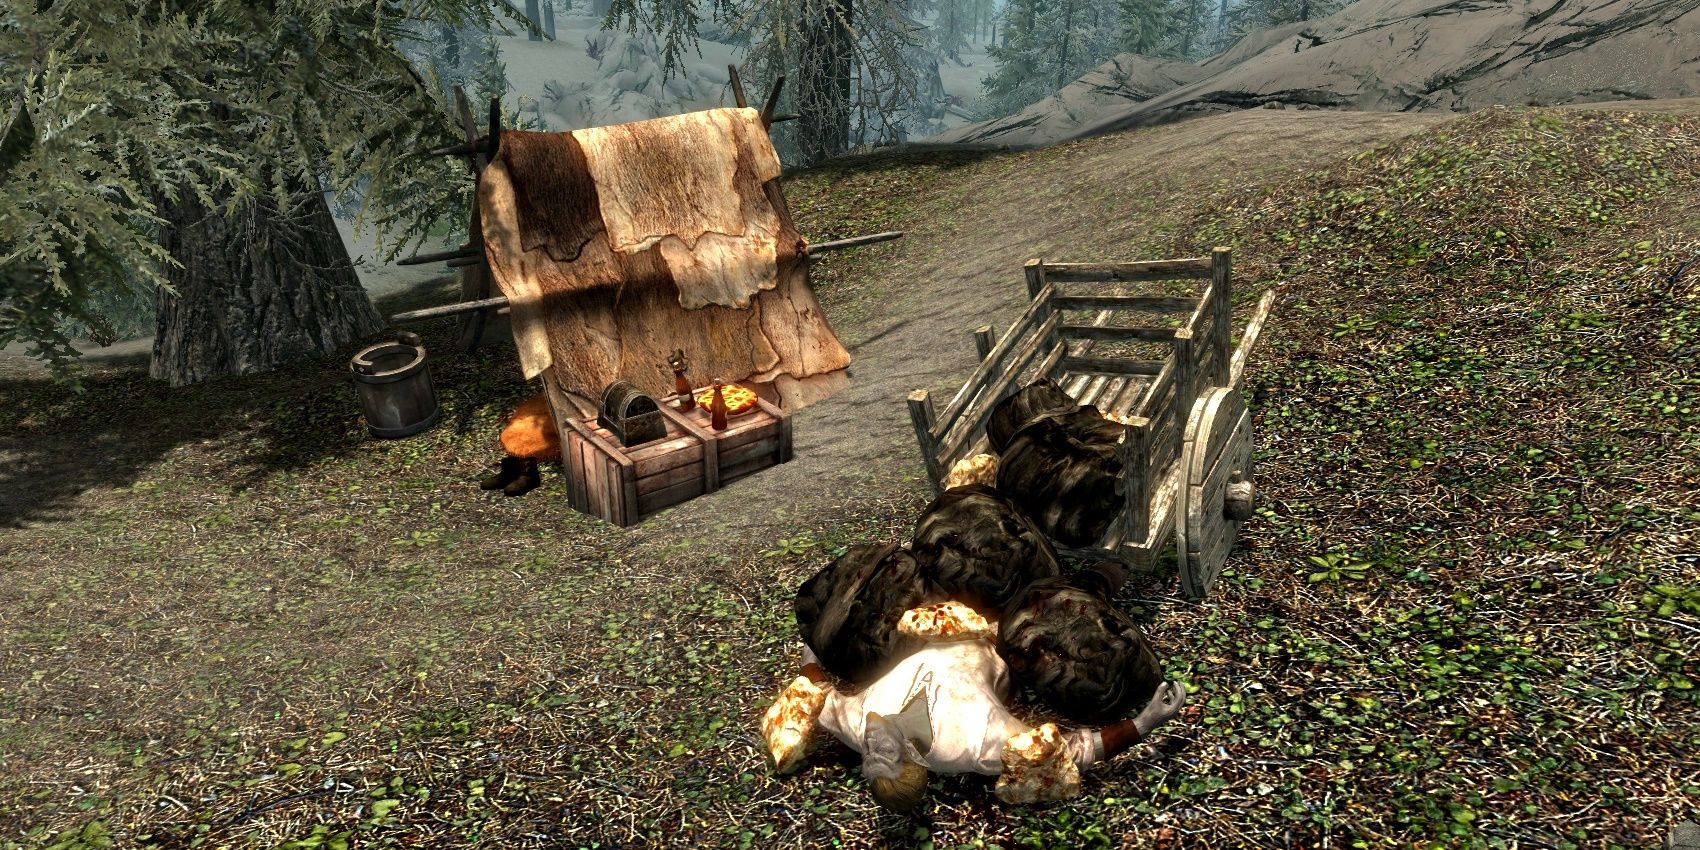 An unfortunate miner lies crushed beneath his cart full of ore in the wilds of Skyrim, just to the left his tent remains stand empty.